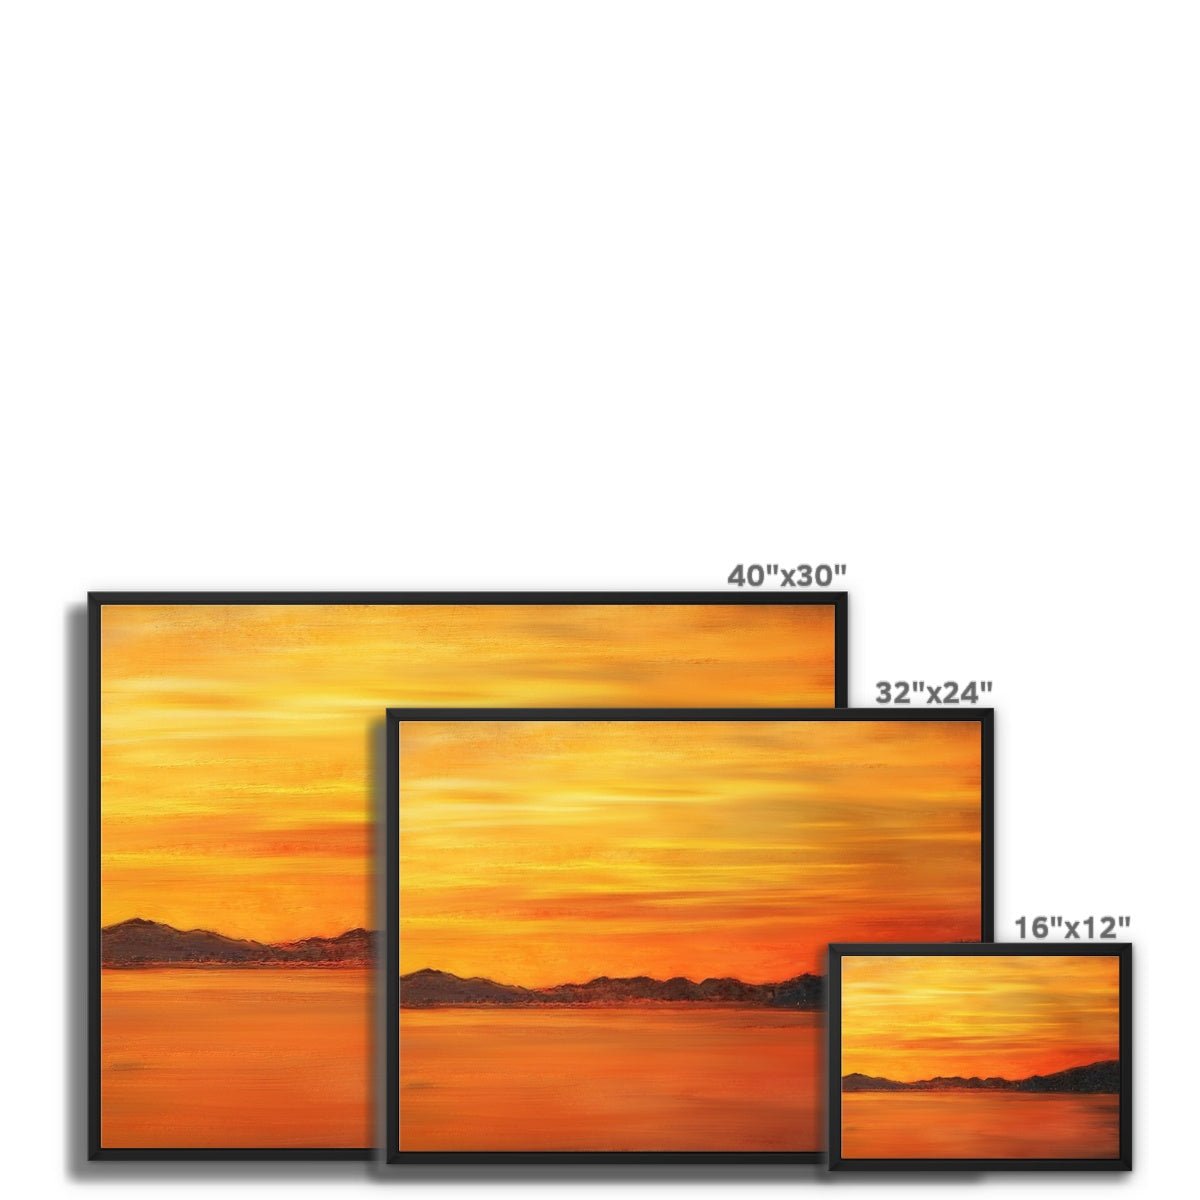 Loch Fyne Sunset Painting | Framed Canvas From Scotland-Floating Framed Canvas Prints-Scottish Lochs & Mountains Art Gallery-Paintings, Prints, Homeware, Art Gifts From Scotland By Scottish Artist Kevin Hunter